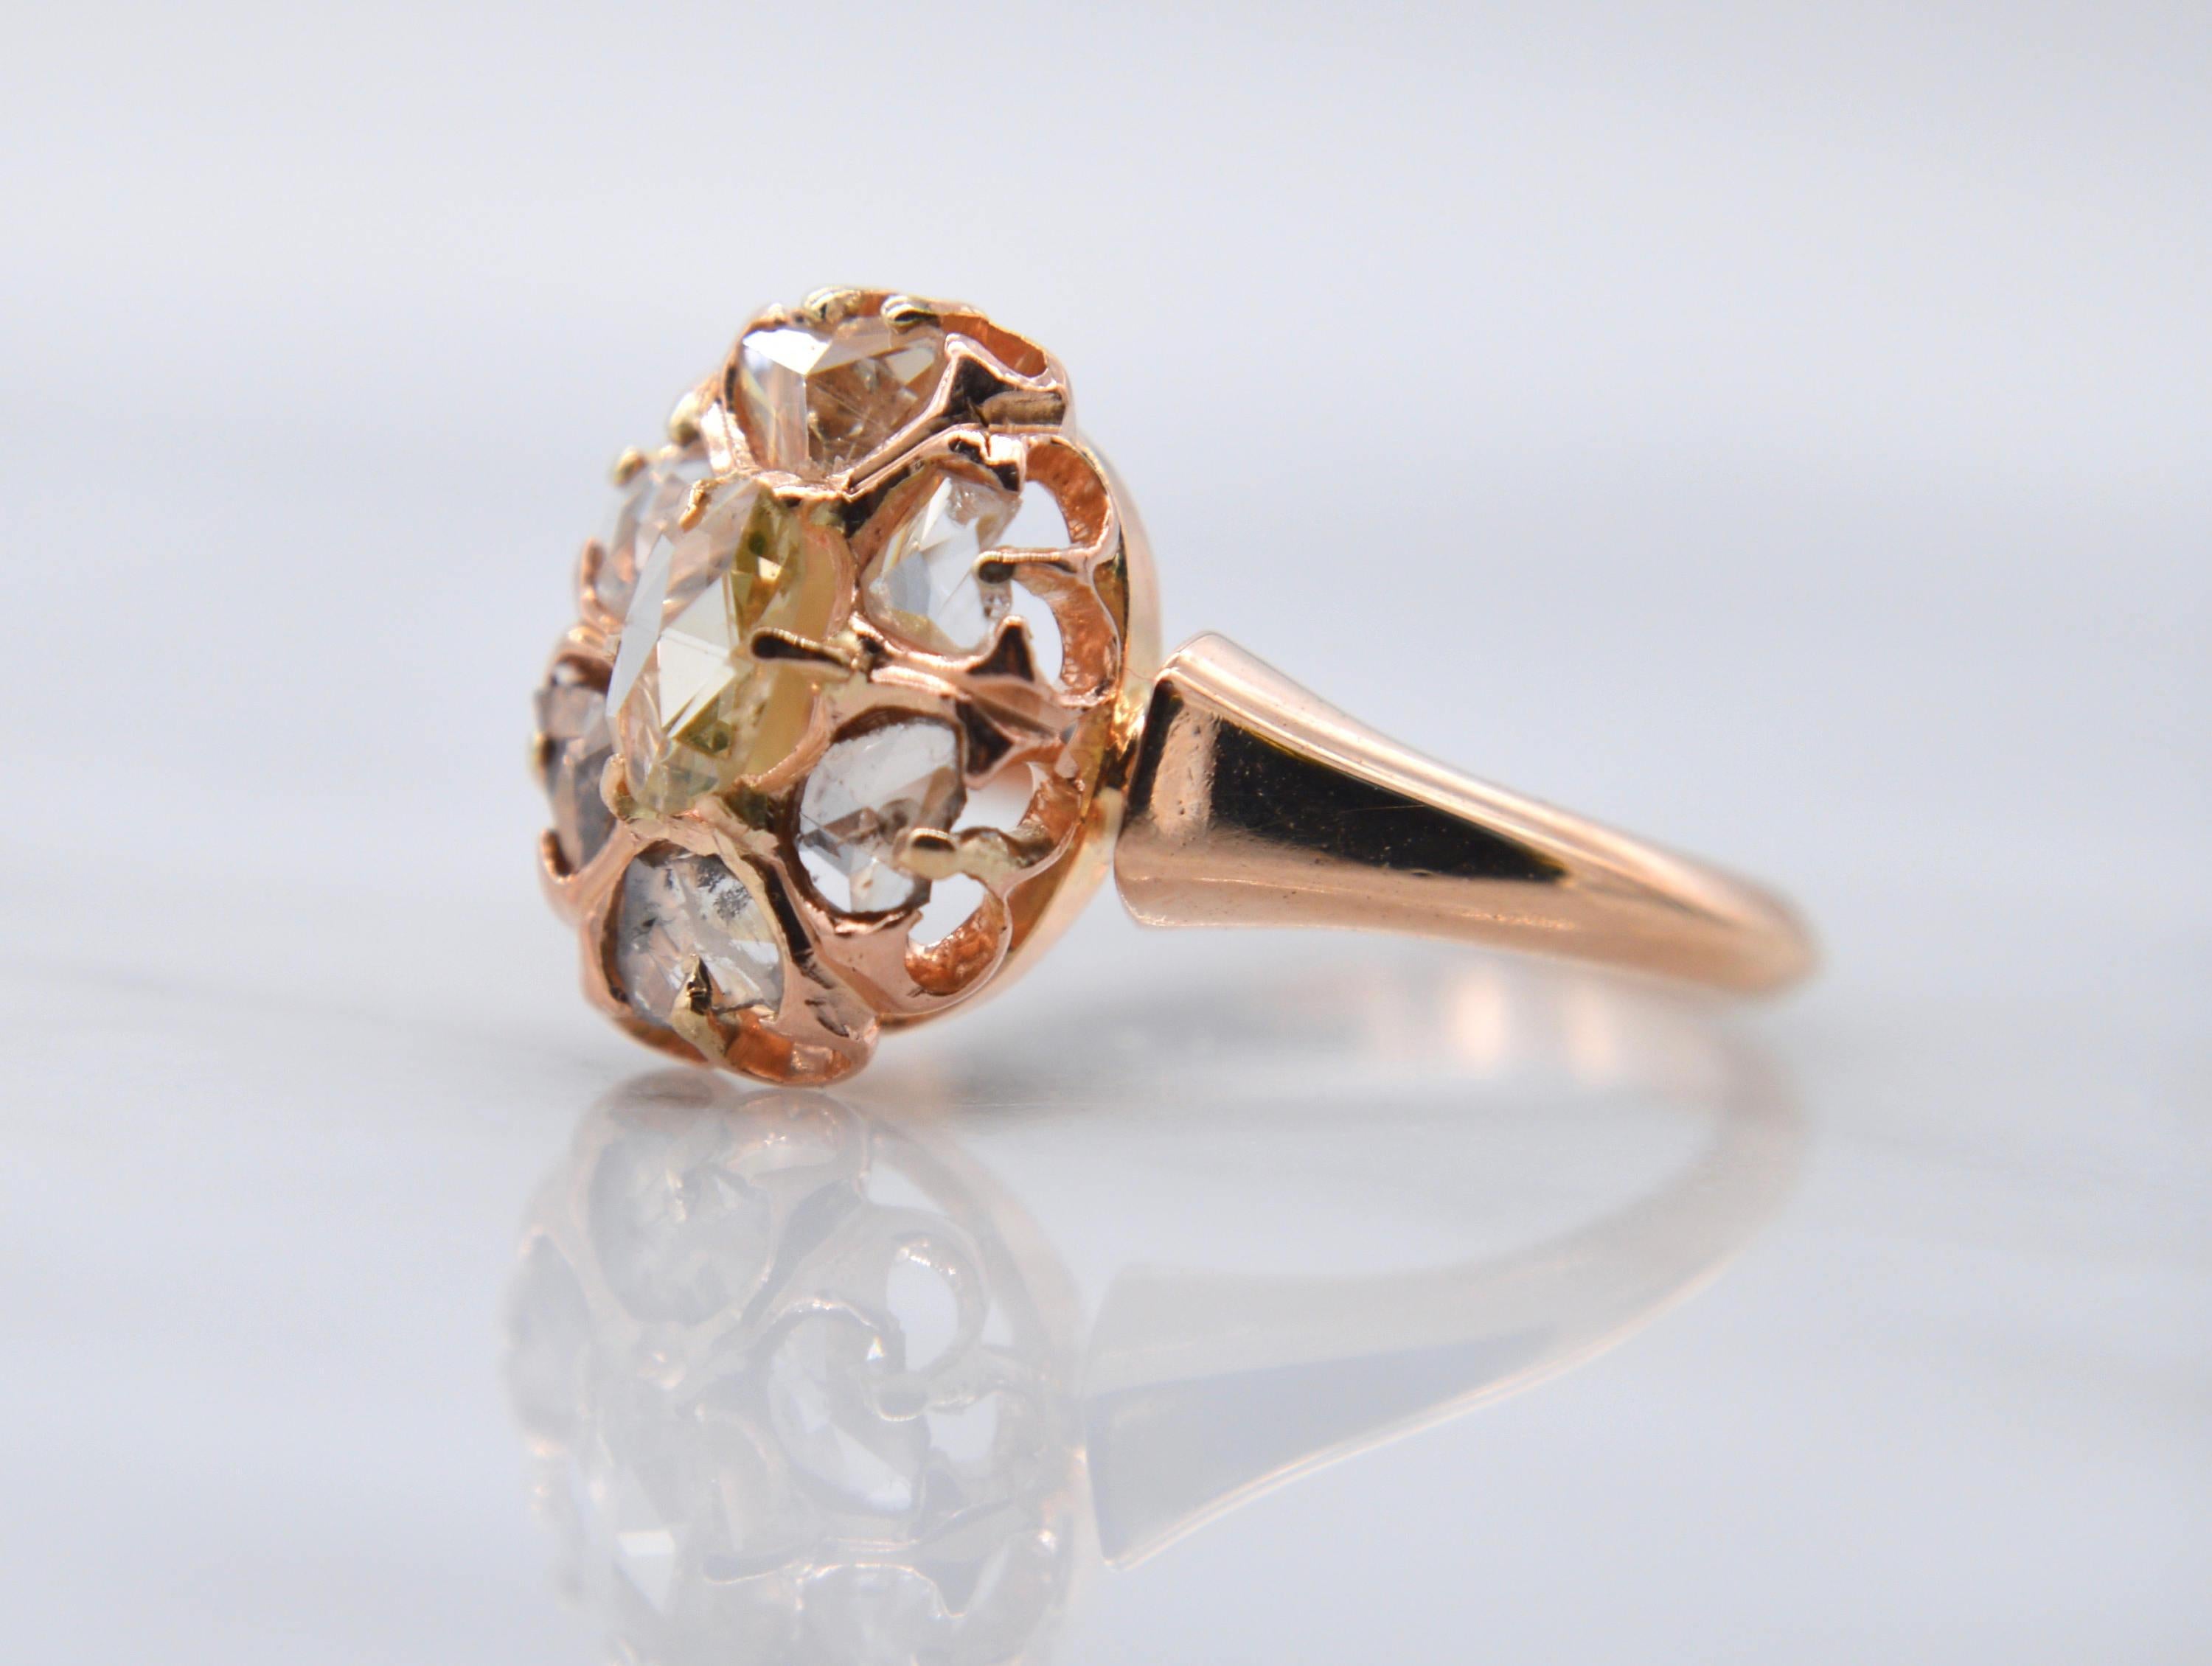 Beautiful antique late 1800s Victorian era total .45 carat rosecut diamond cluster halo 14K rose gold ring. Size 5.75, can be resized by a jeweler. The diamonds have been graded as color H, clarity VS2. Gold is unmarked but tested as solid 14K. The